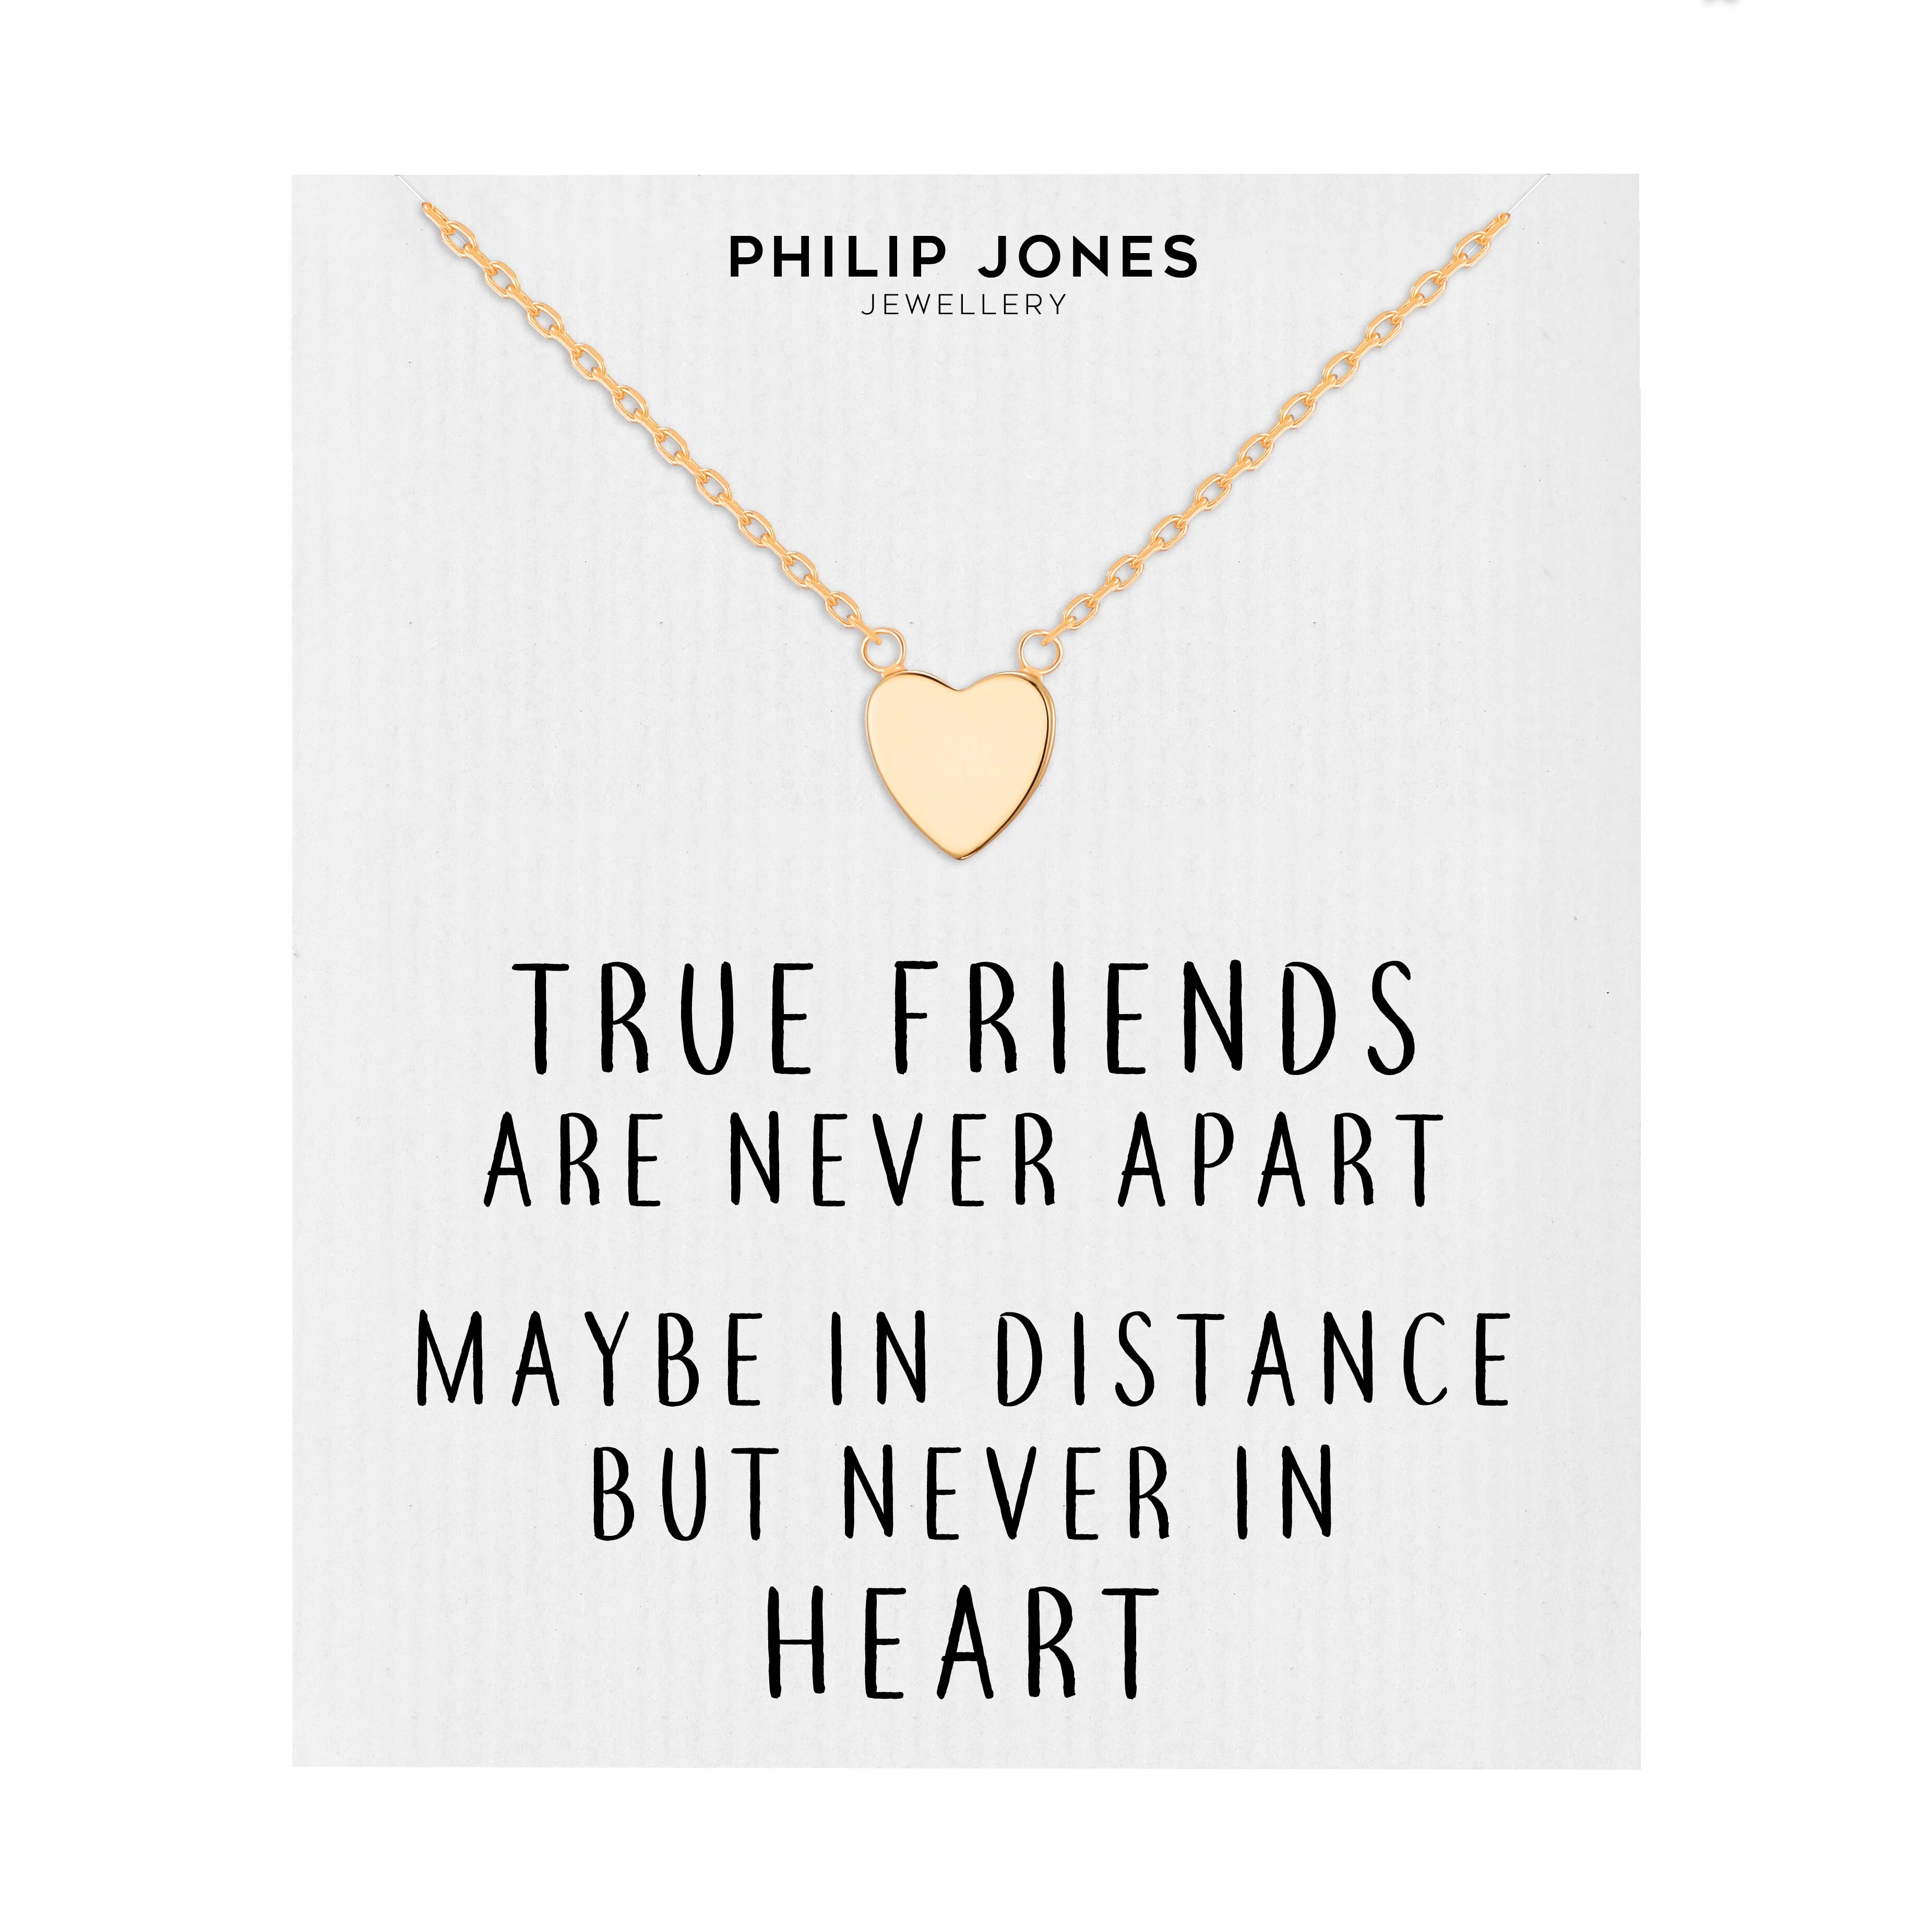 Philip Jones Jewellery Gold Plated Heart Necklace with Quote Card